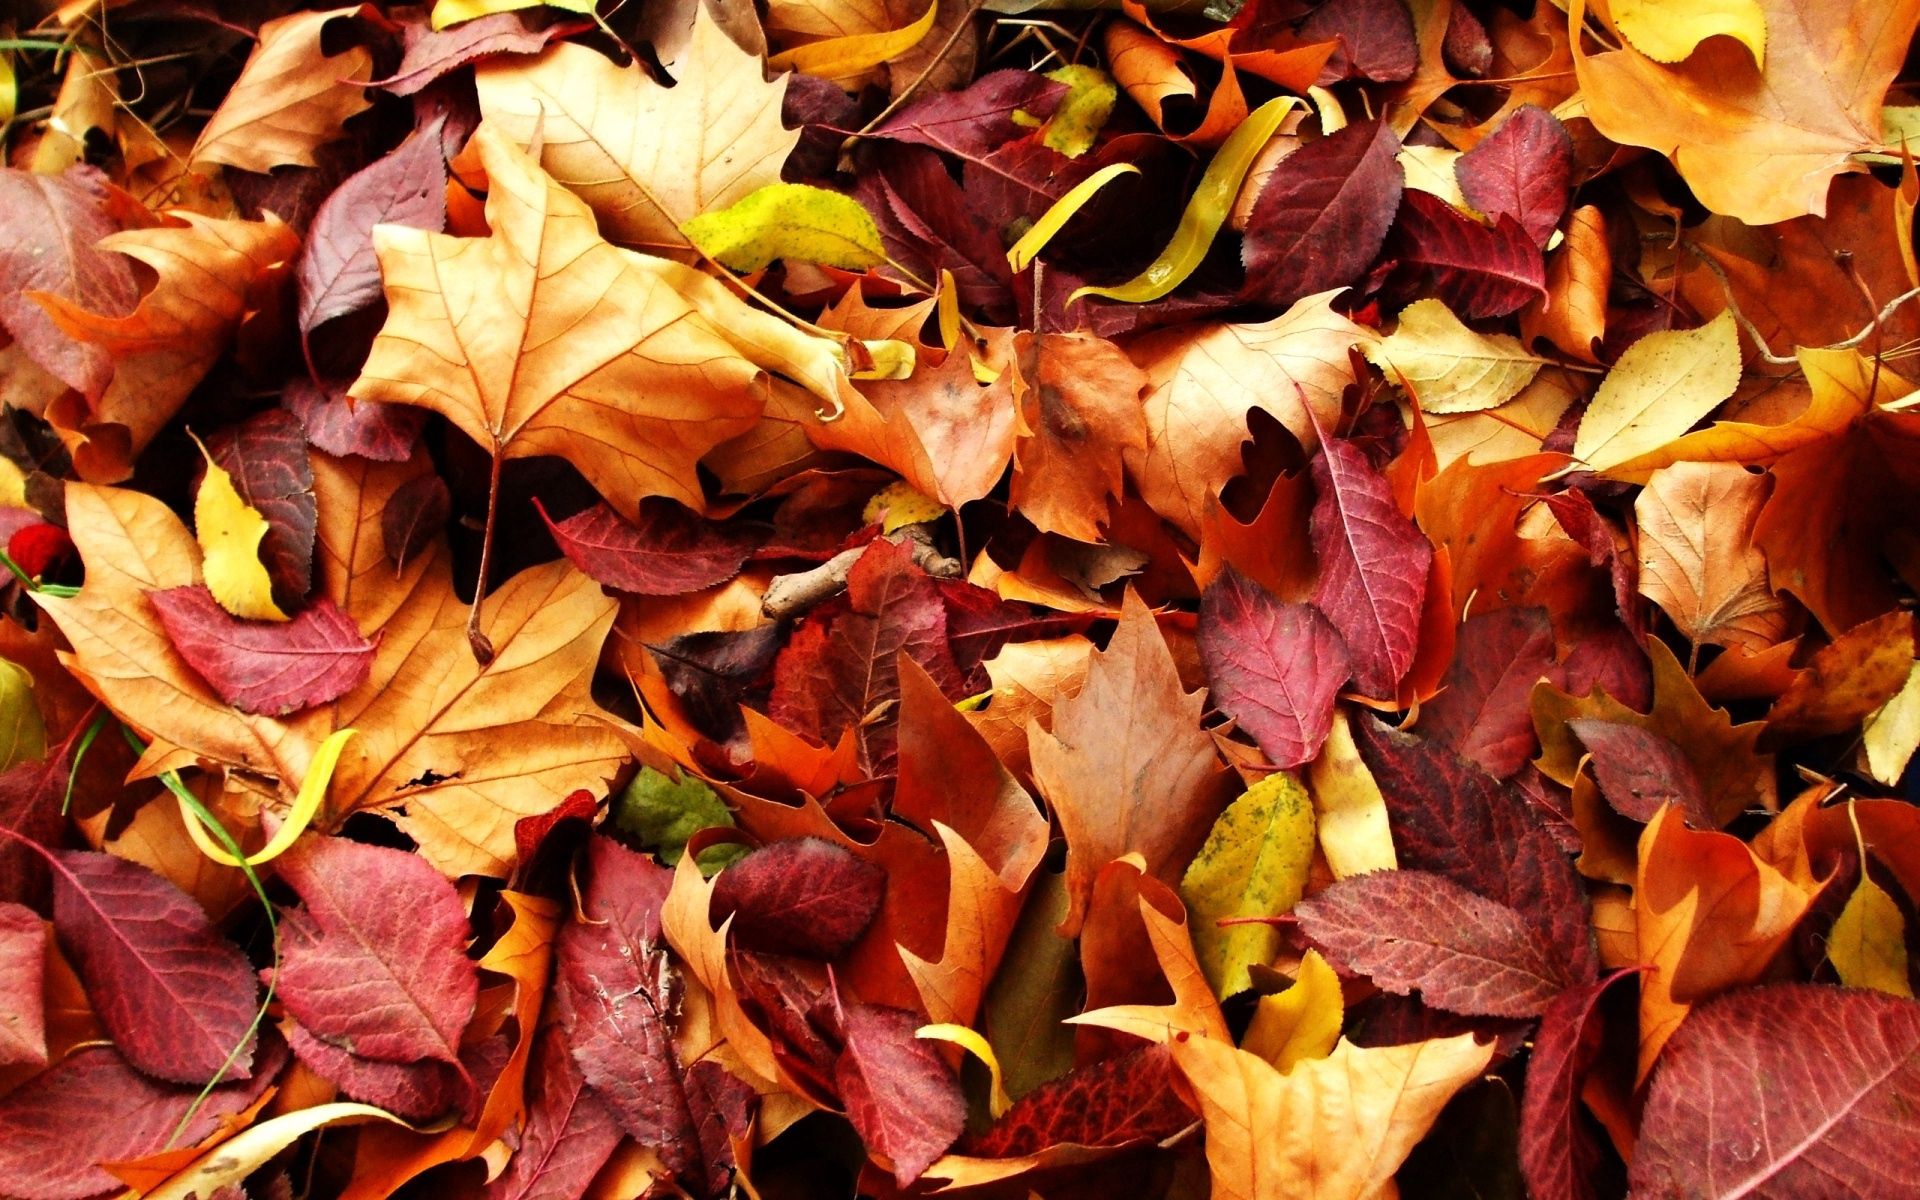 92360 Screensavers and Wallpapers Fallen for phone. Download nature, autumn, leaves, fallen pictures for free